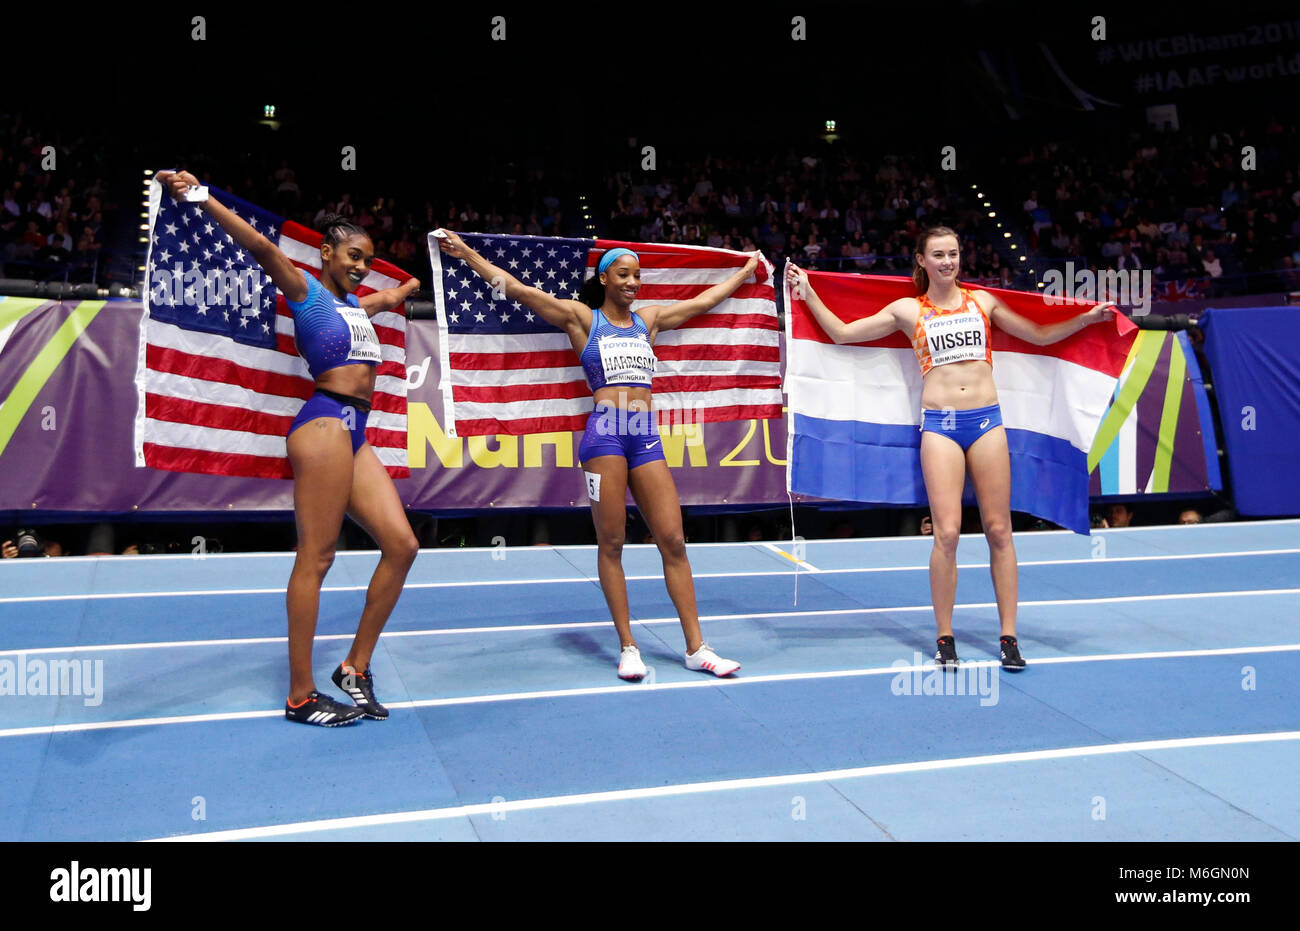 Birmingham, US athlete Kendra Harrison and bronze medalist Netherlands' Nadine Visser pose after the women's 60m hurdles final of the IAAF World Indoor Championships at Arena Birmingham in Birmingham. 3rd Mar, 2018. (From L to R)Silver medalist US athlete Christina Manning, gold medalist US athlete Kendra Harrison and bronze medalist Netherlands' Nadine Visser pose after the women's 60m hurdles final of the IAAF World Indoor Championships at Arena Birmingham in Birmingham, Britain on March 3, 2018. Credit: Han Yan/Xinhua/Alamy Live News Stock Photo